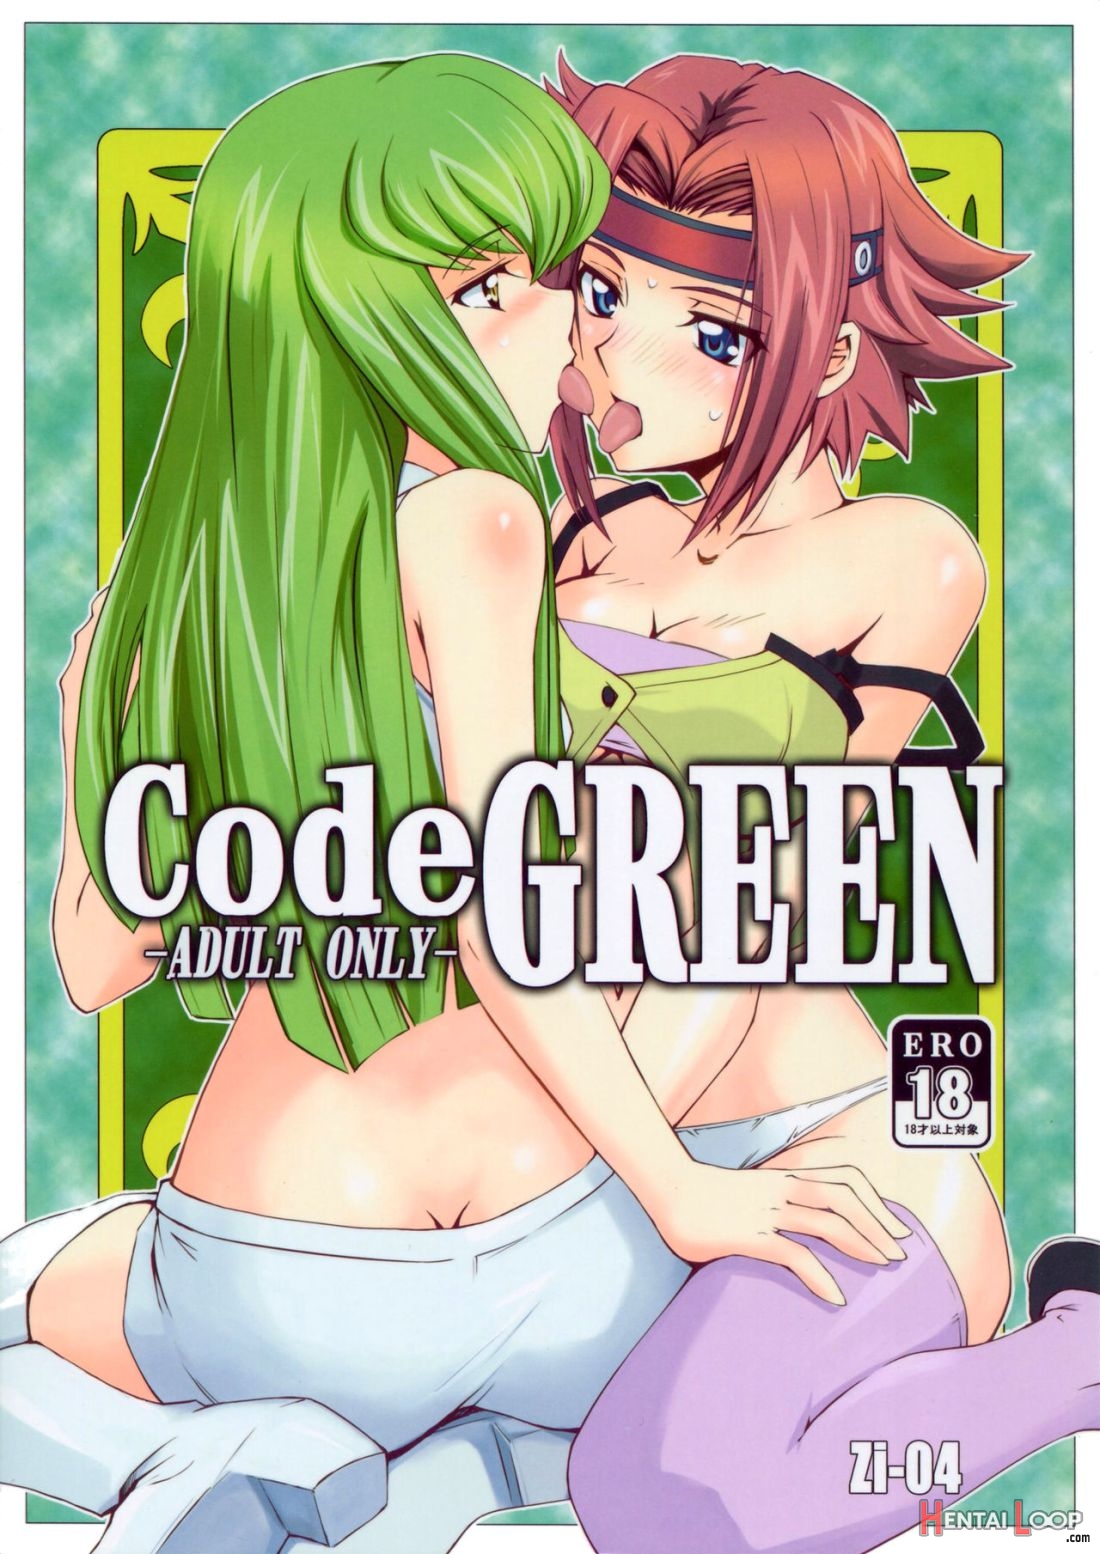 Codegreen page 1